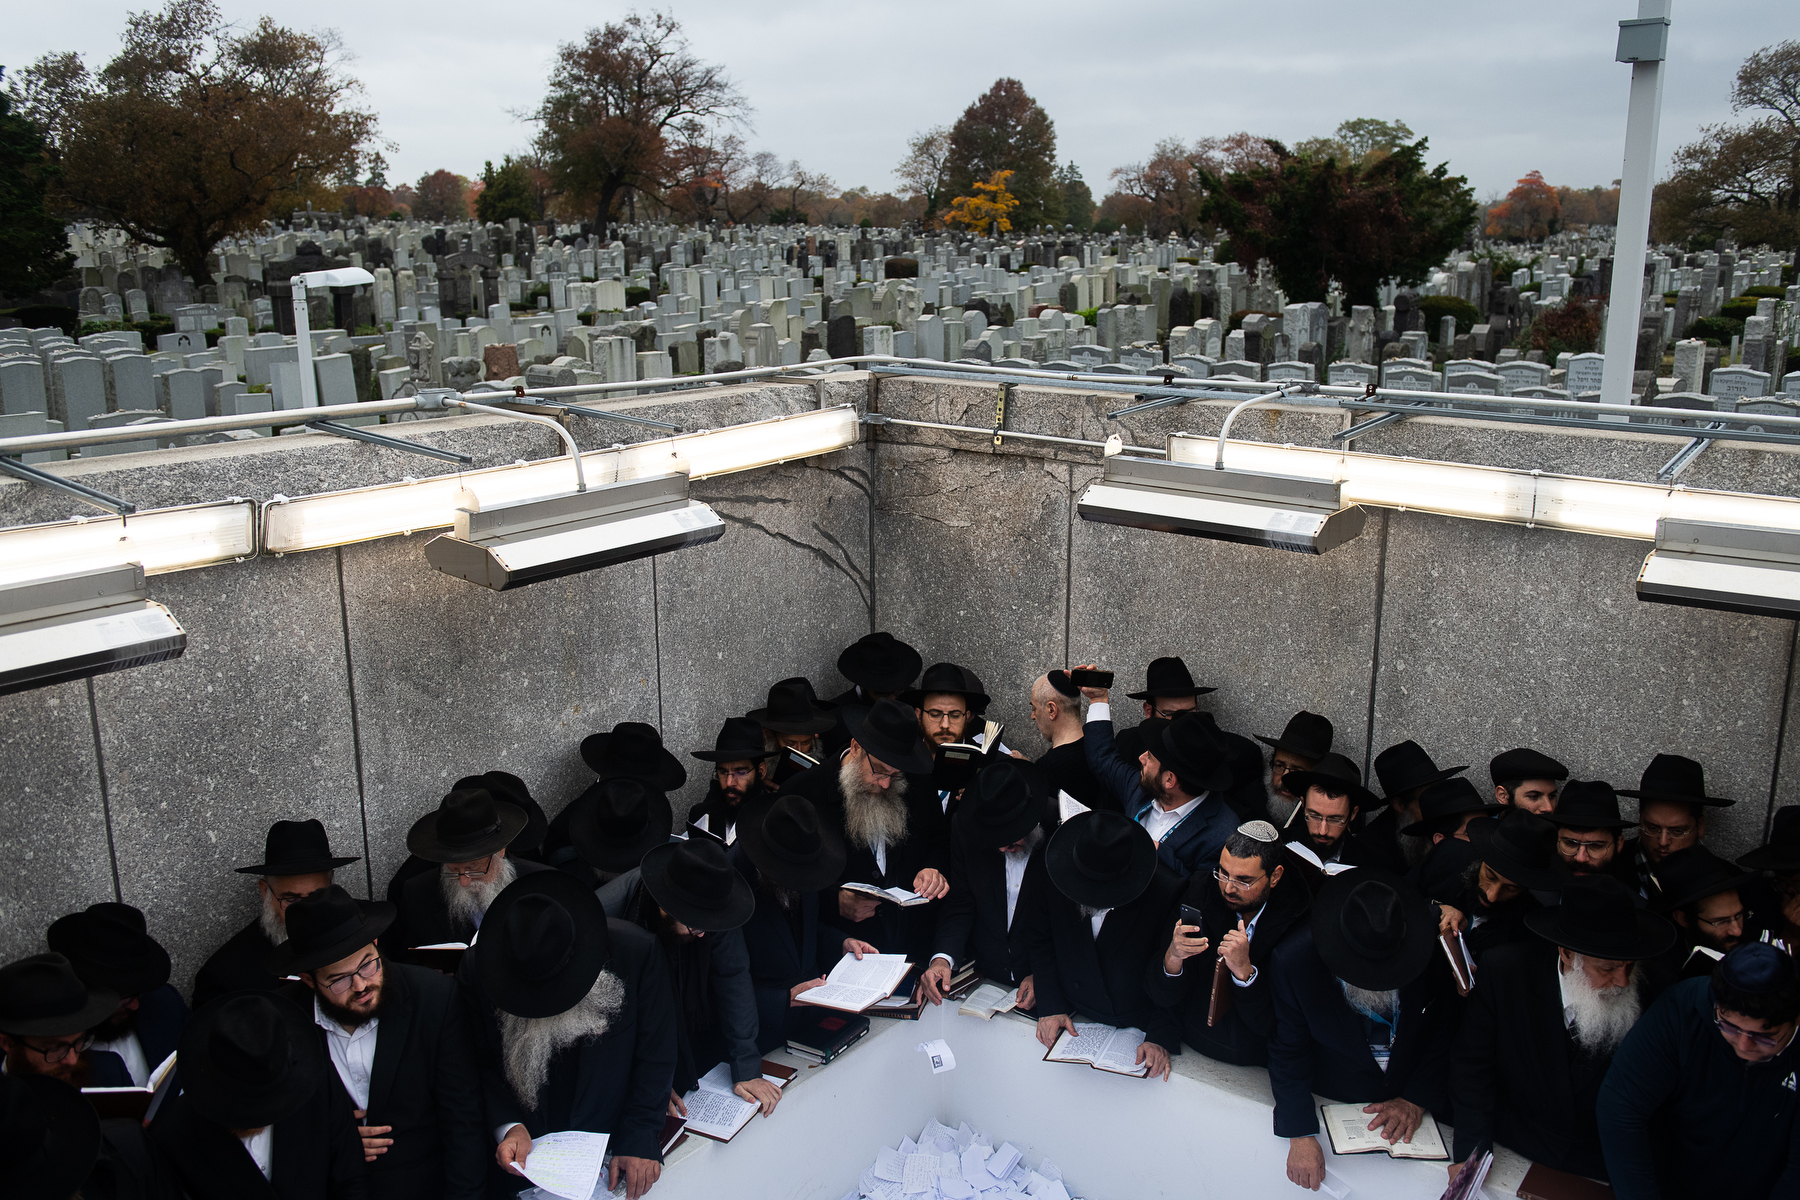  Chabad-Lubavitch rabbis pray at the gravesite of the Lubavitcher Rebbe, Rabbi Menachem M. Schneerson, in Queens, NY. 